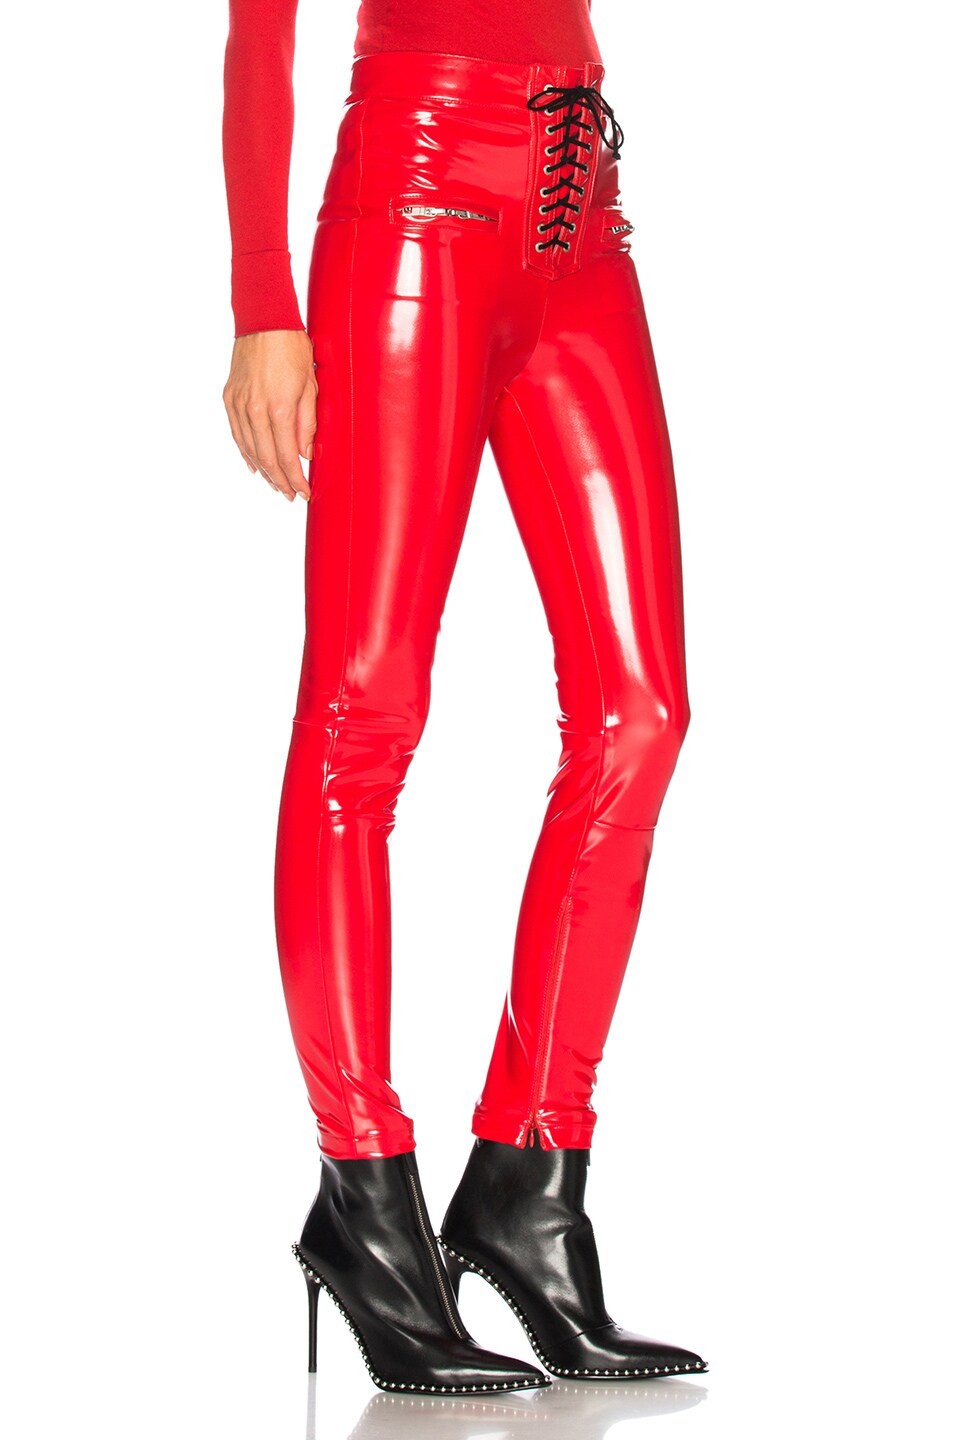 Unravel Latex Lace Up Seam Pants in Red | FWRD